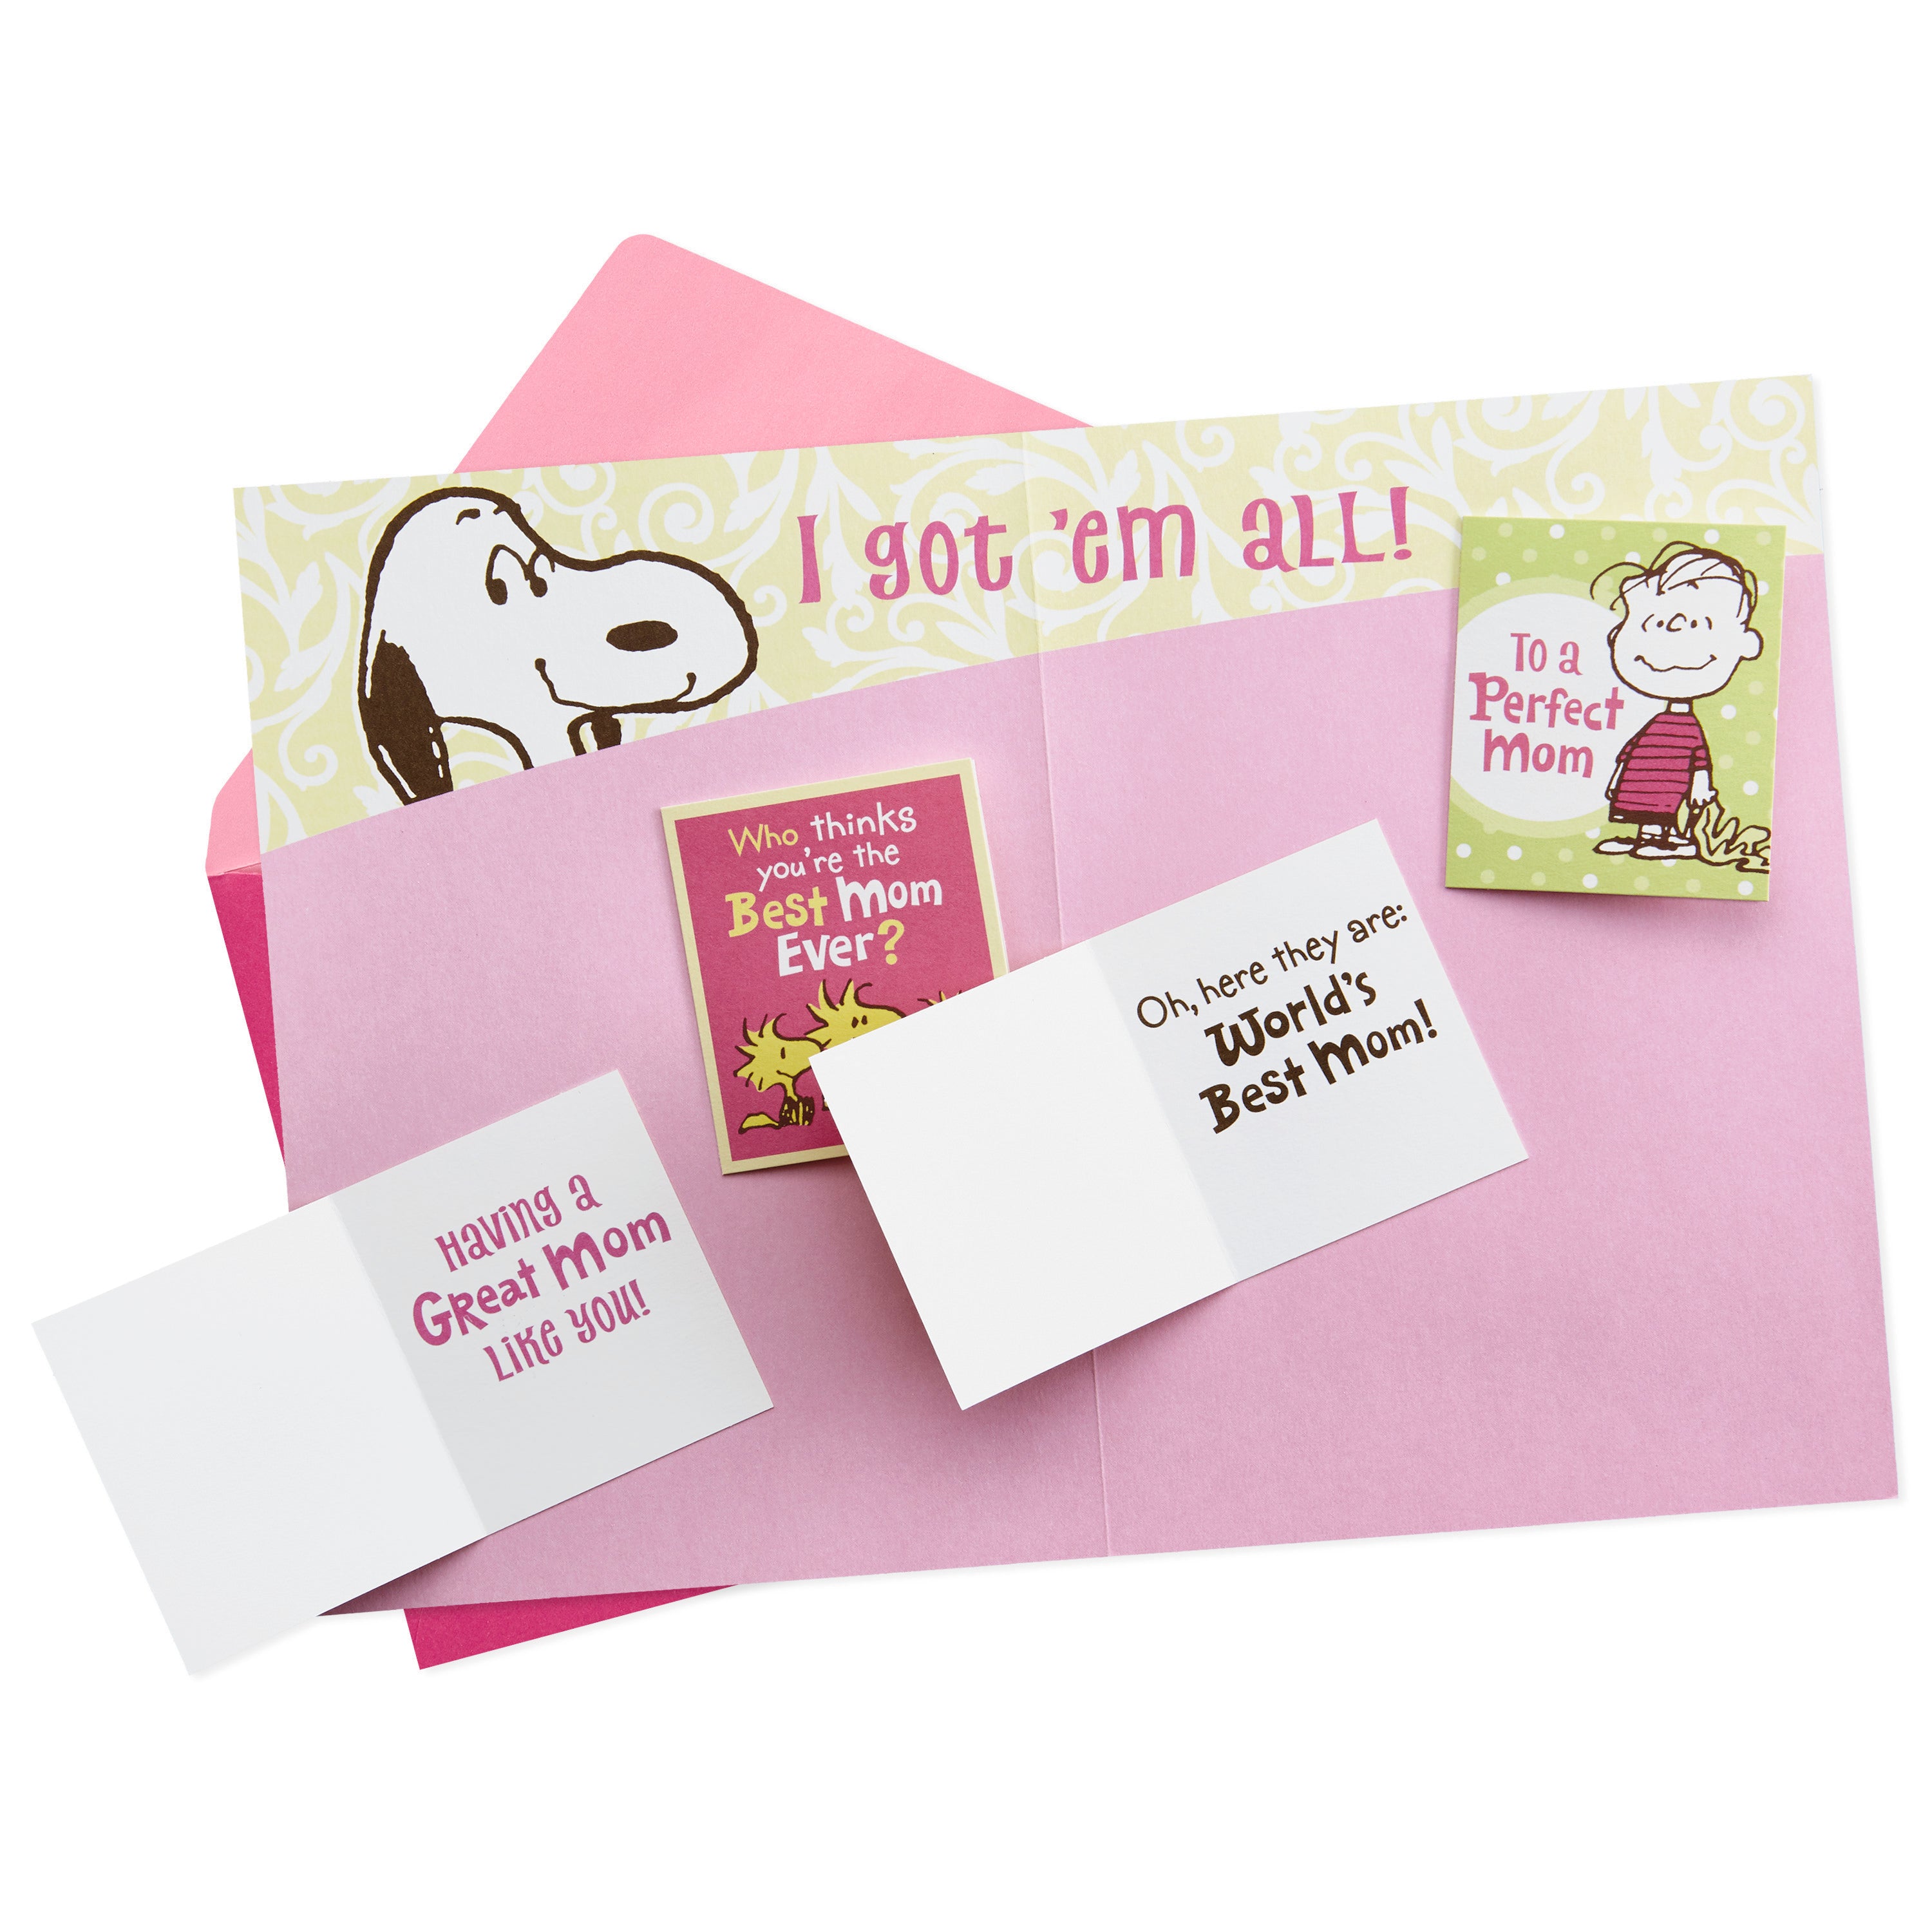 Funny Mother's Day Card for Mom (Snoopy and Woodstock, Mini Cards Inside)